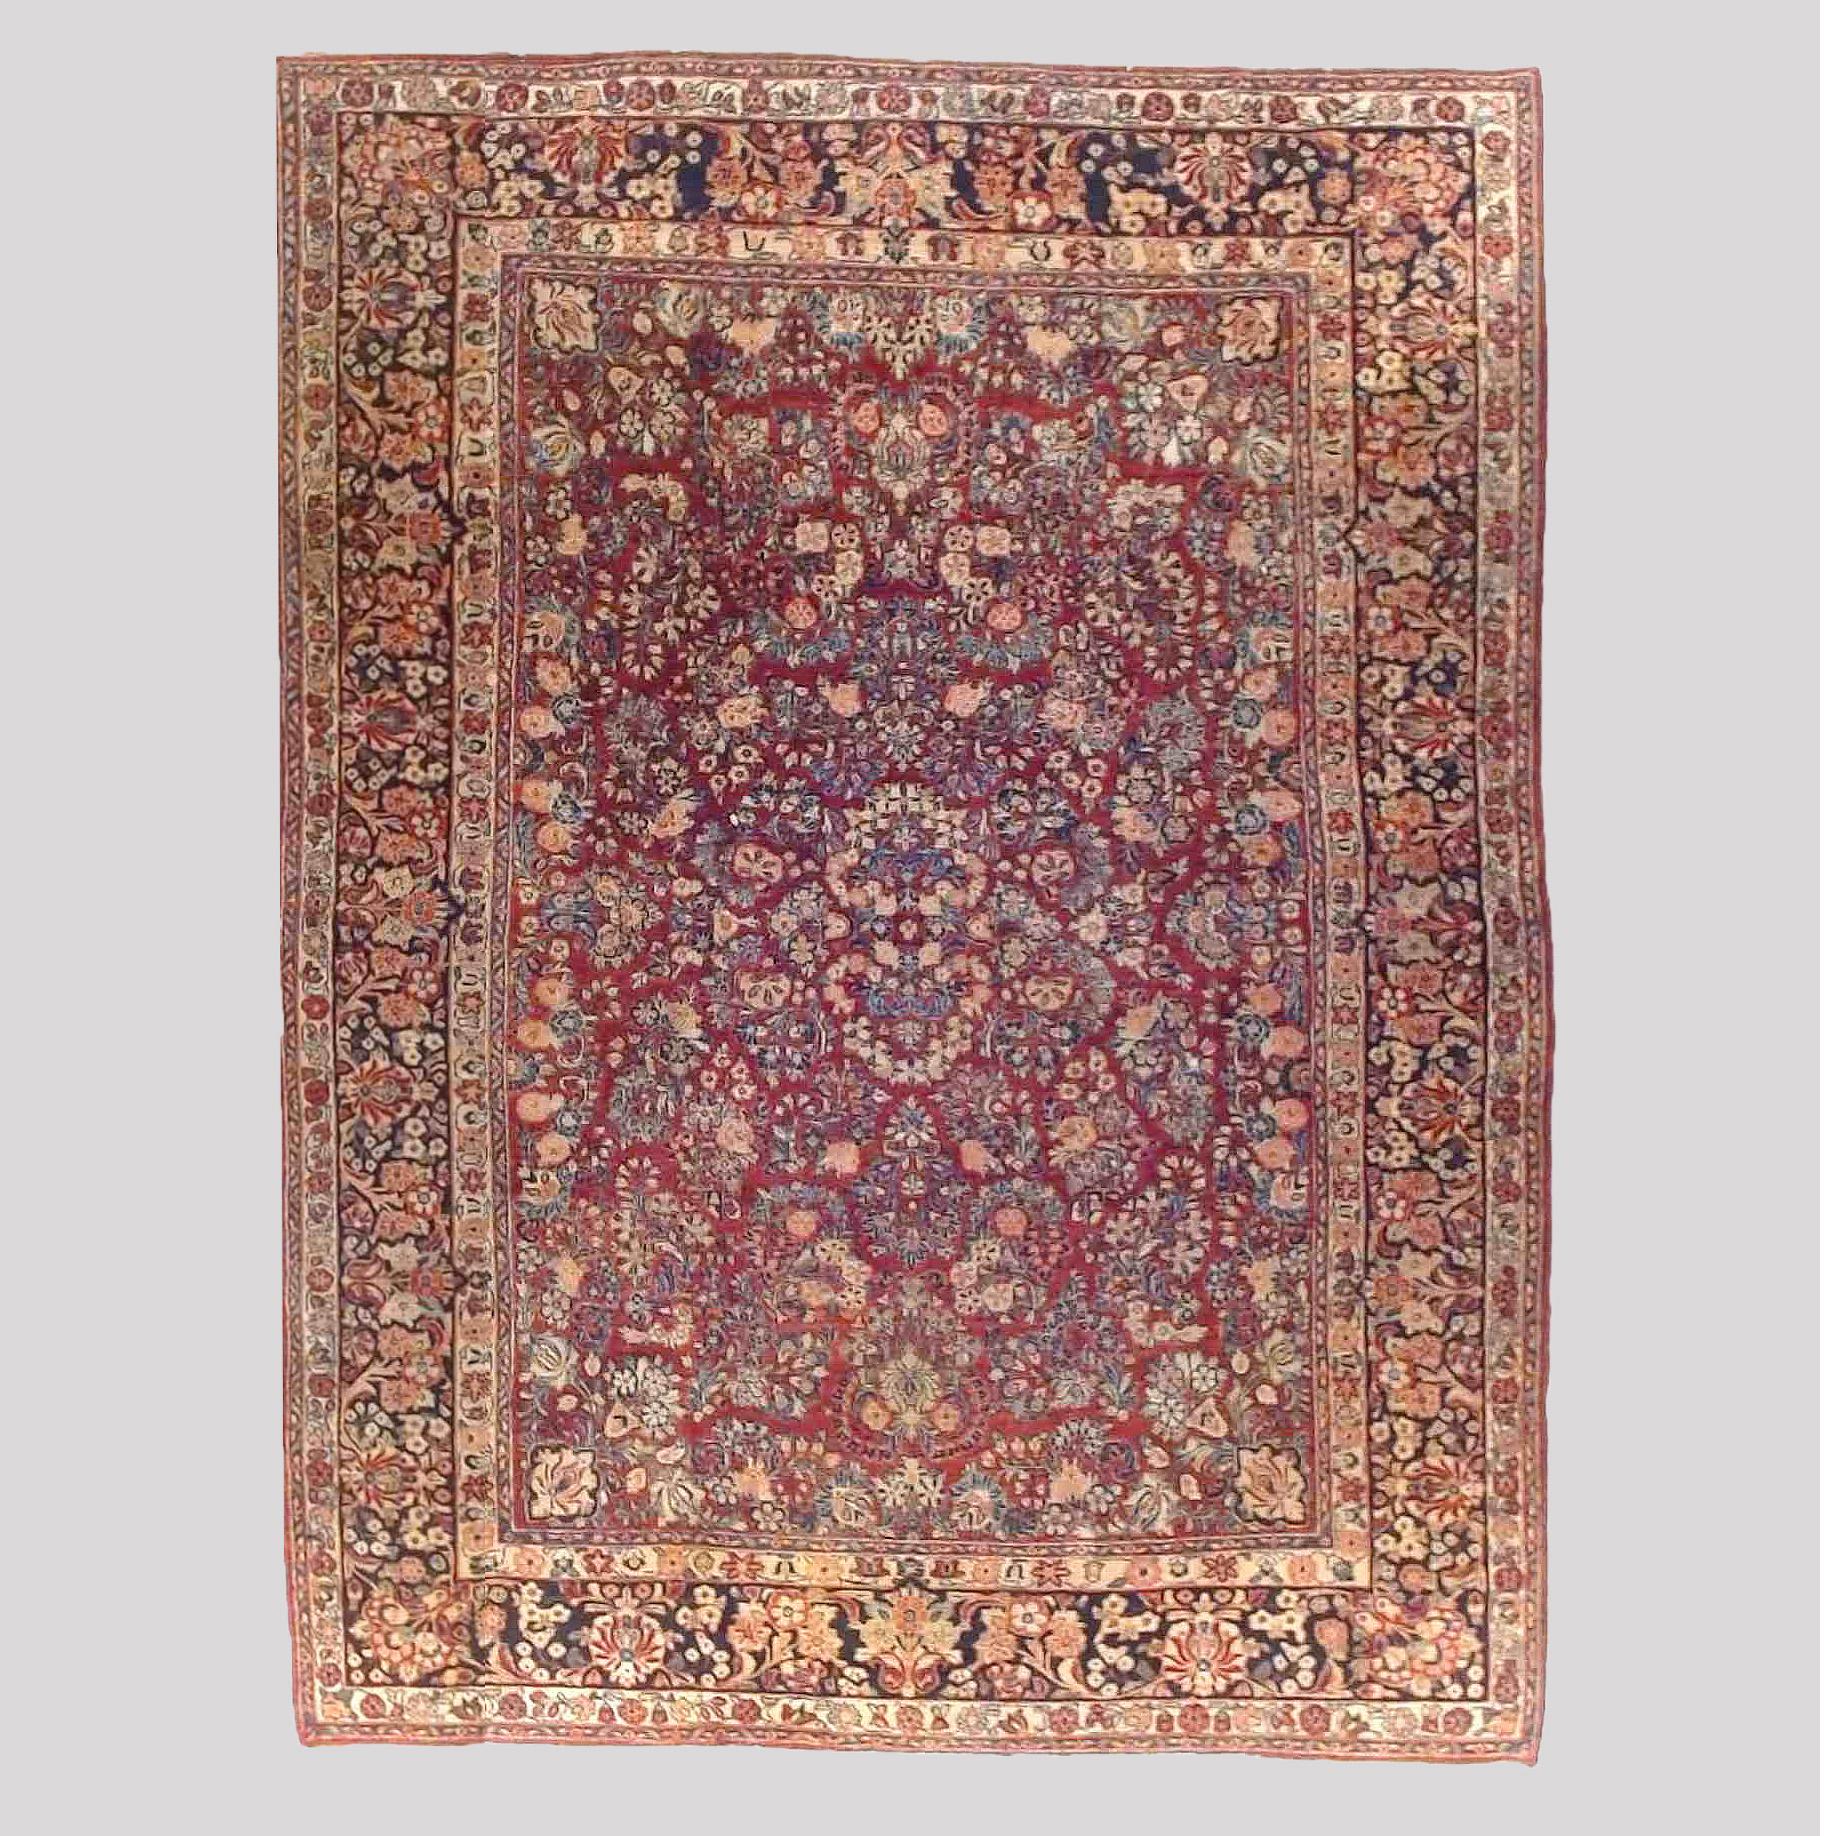 An antique Sarouk oriental carpet offers wool construction with central medallion and allover floral and foliate design on red ground, c1930

Measures - 142